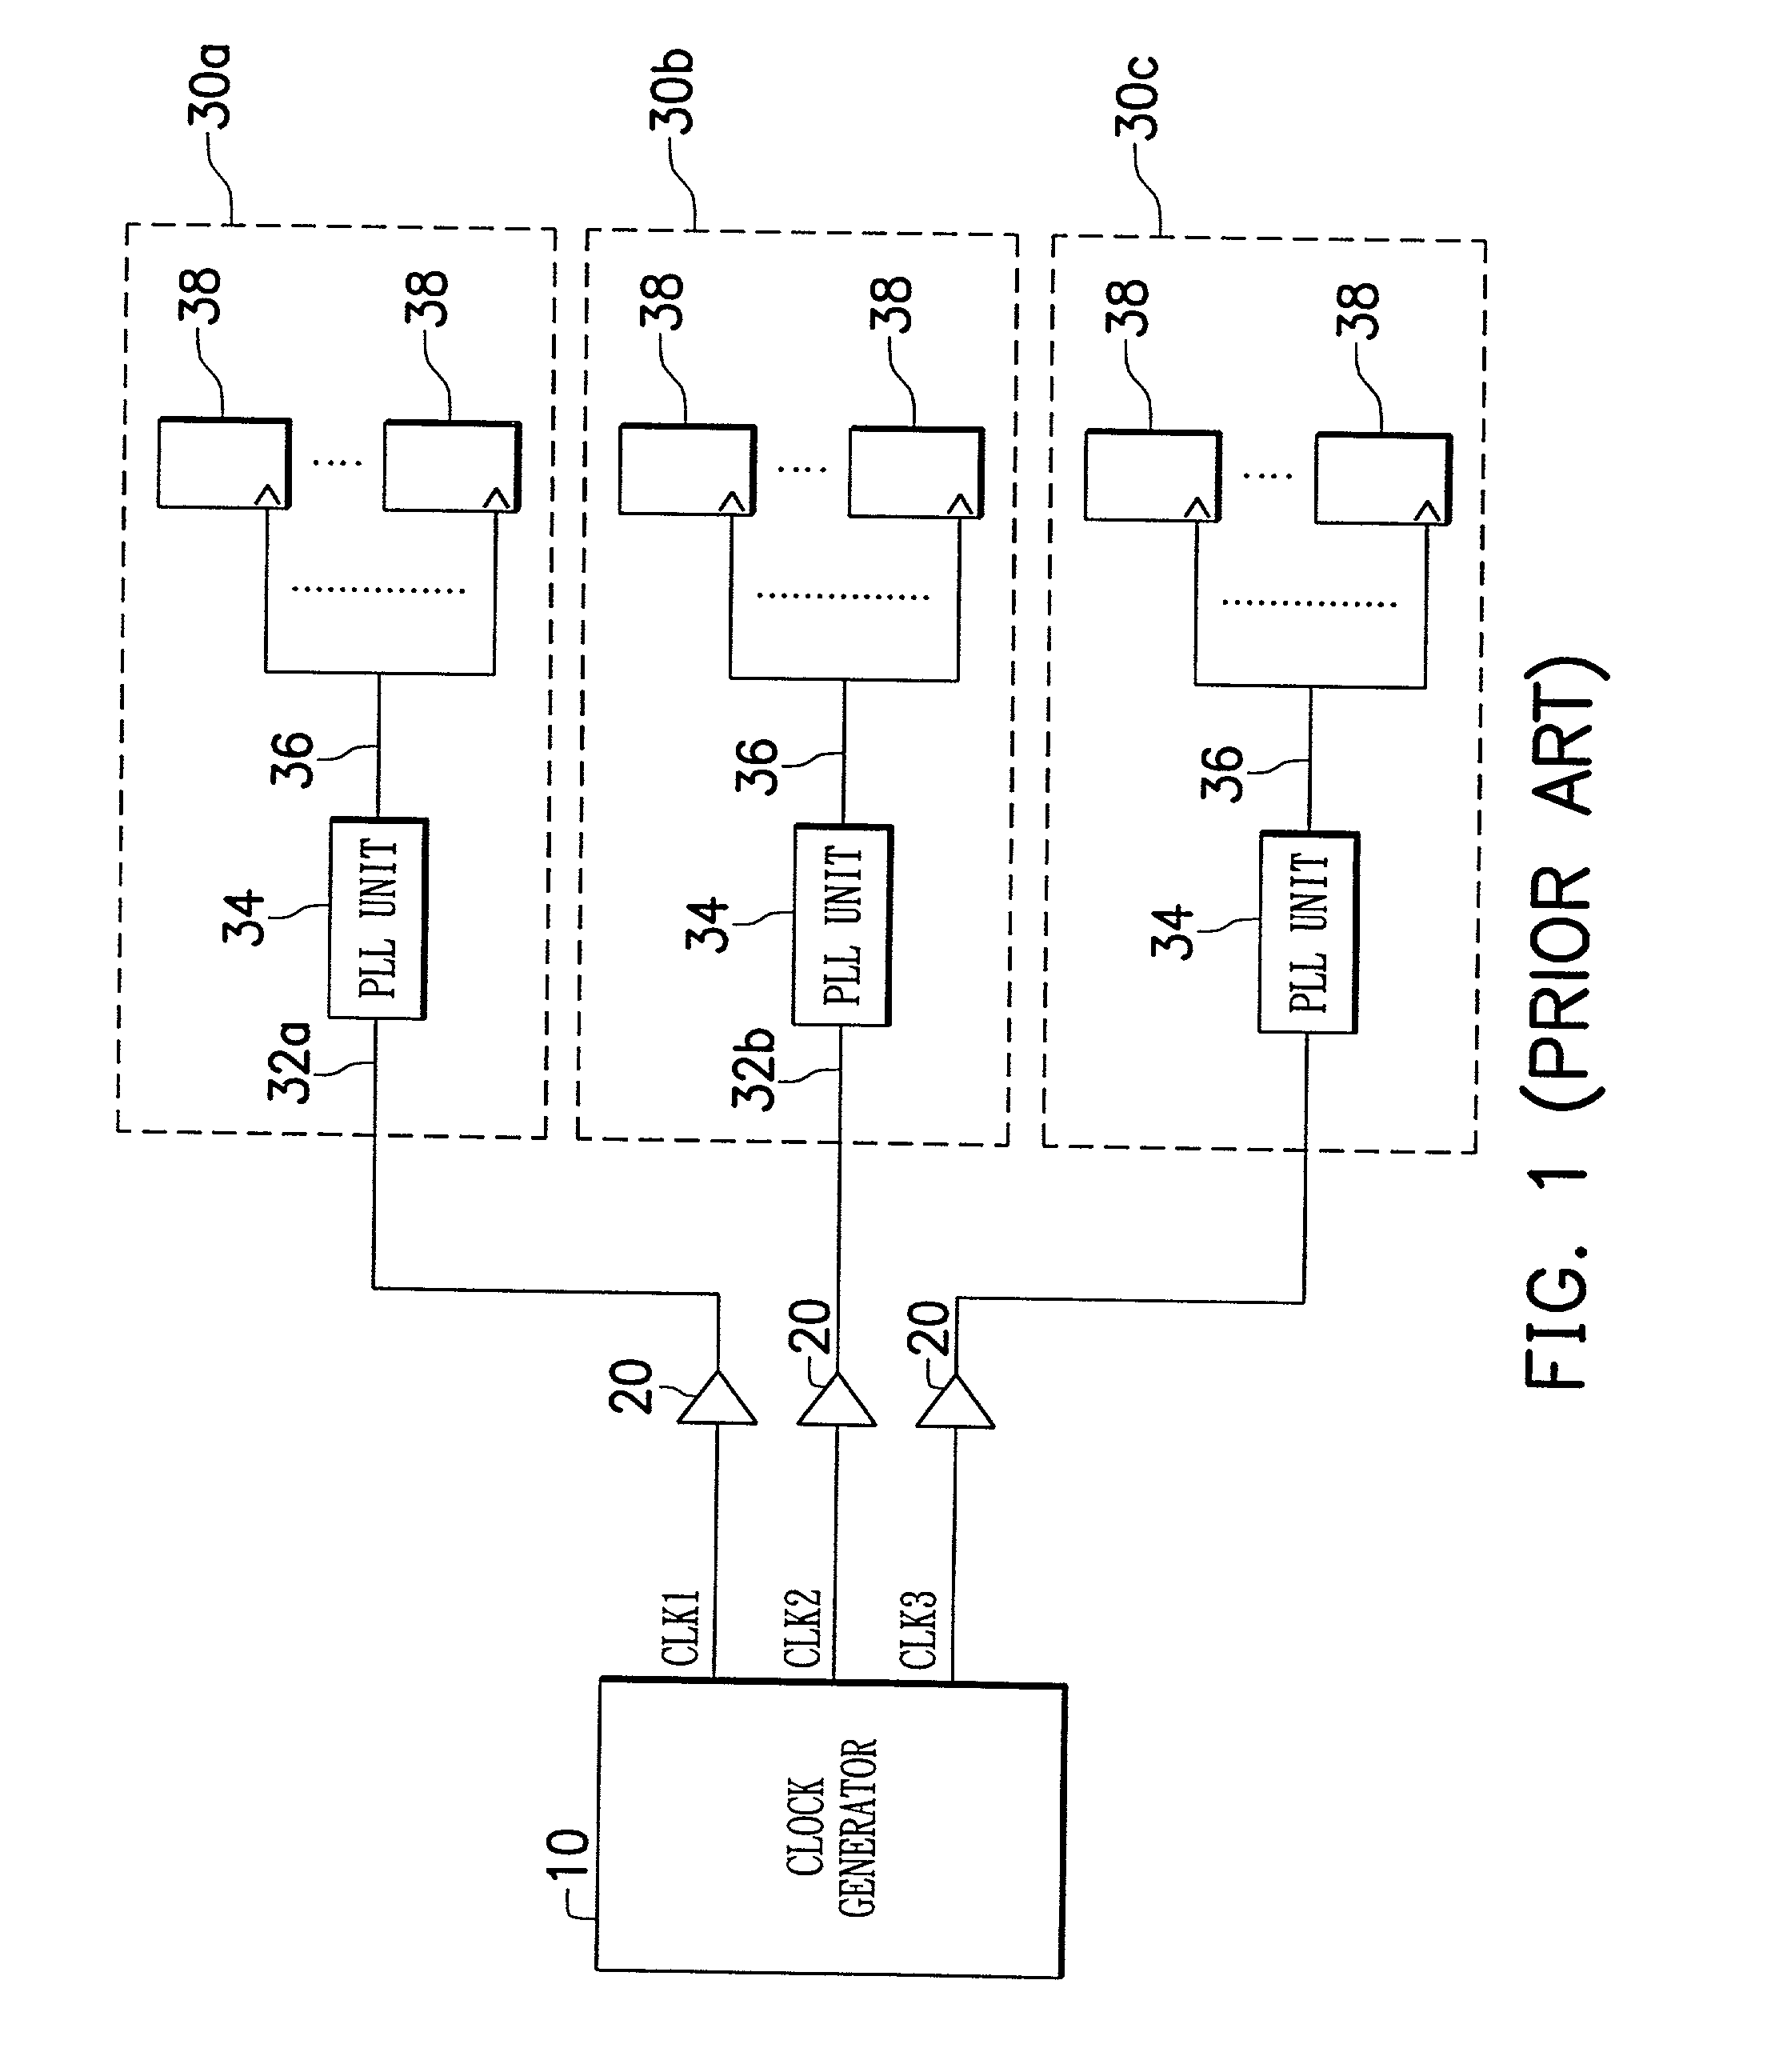 Method and apparatus for reducing clock skew in an integrated circuit